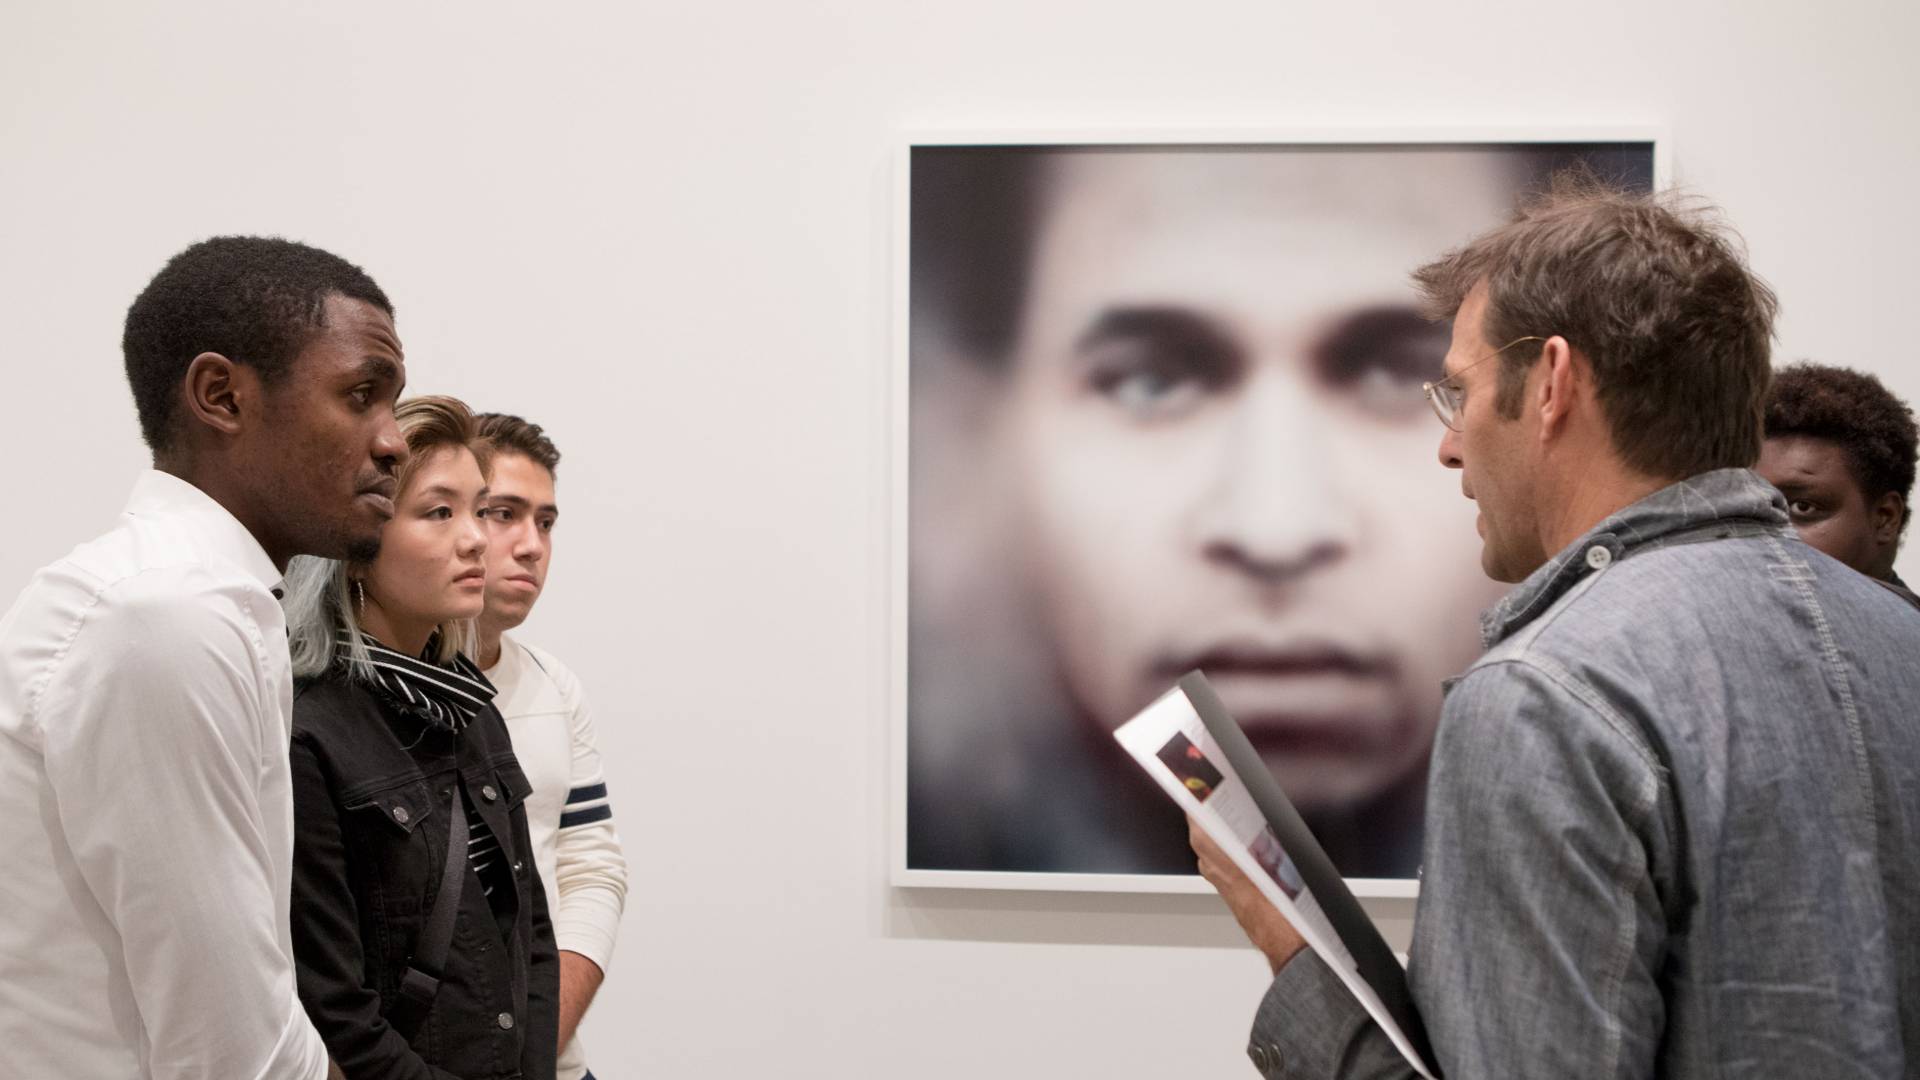 Professor Whetstone discusses photo with students at New York gallery 